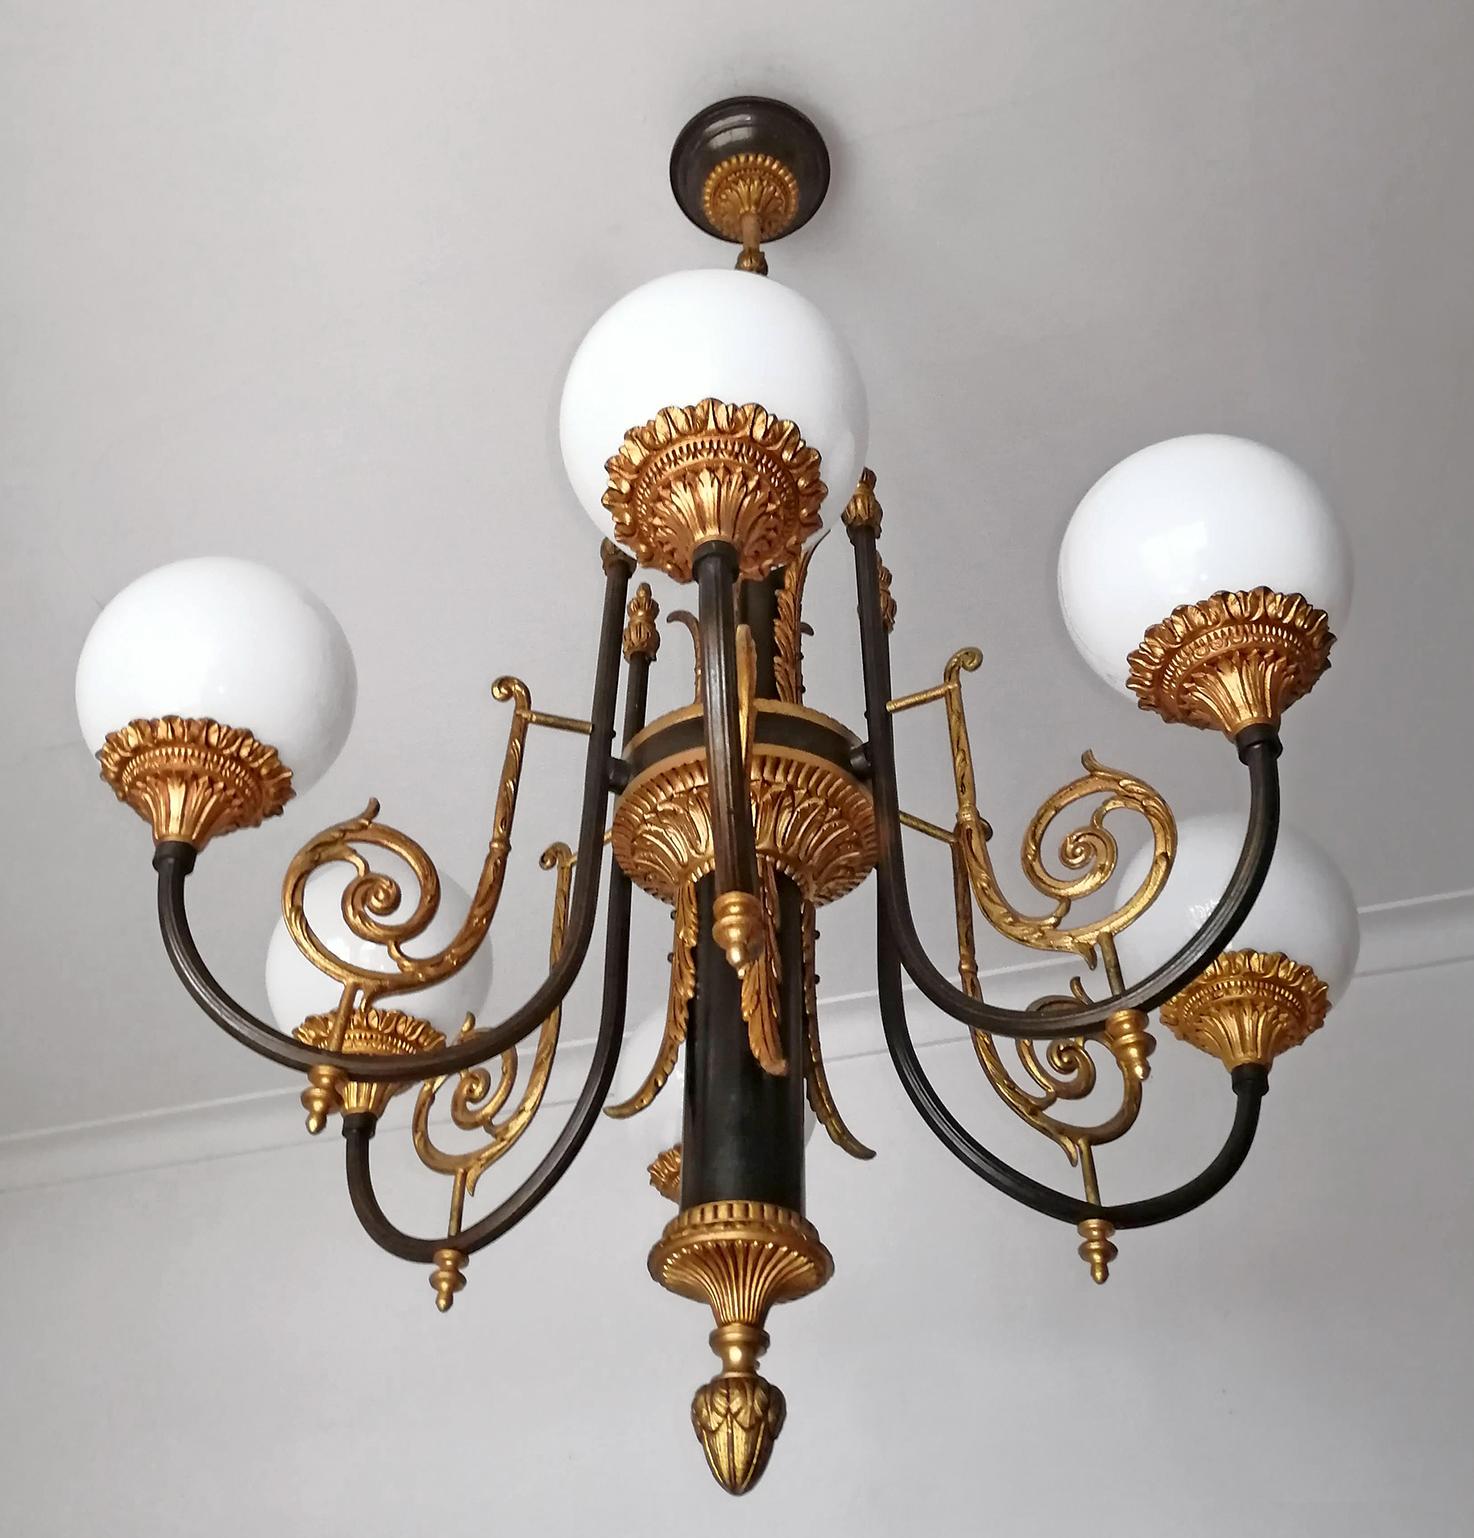 Antique French Empire Neoclassical Gilt & Patina Bronze Opaline Globe Chandelier For Sale 1